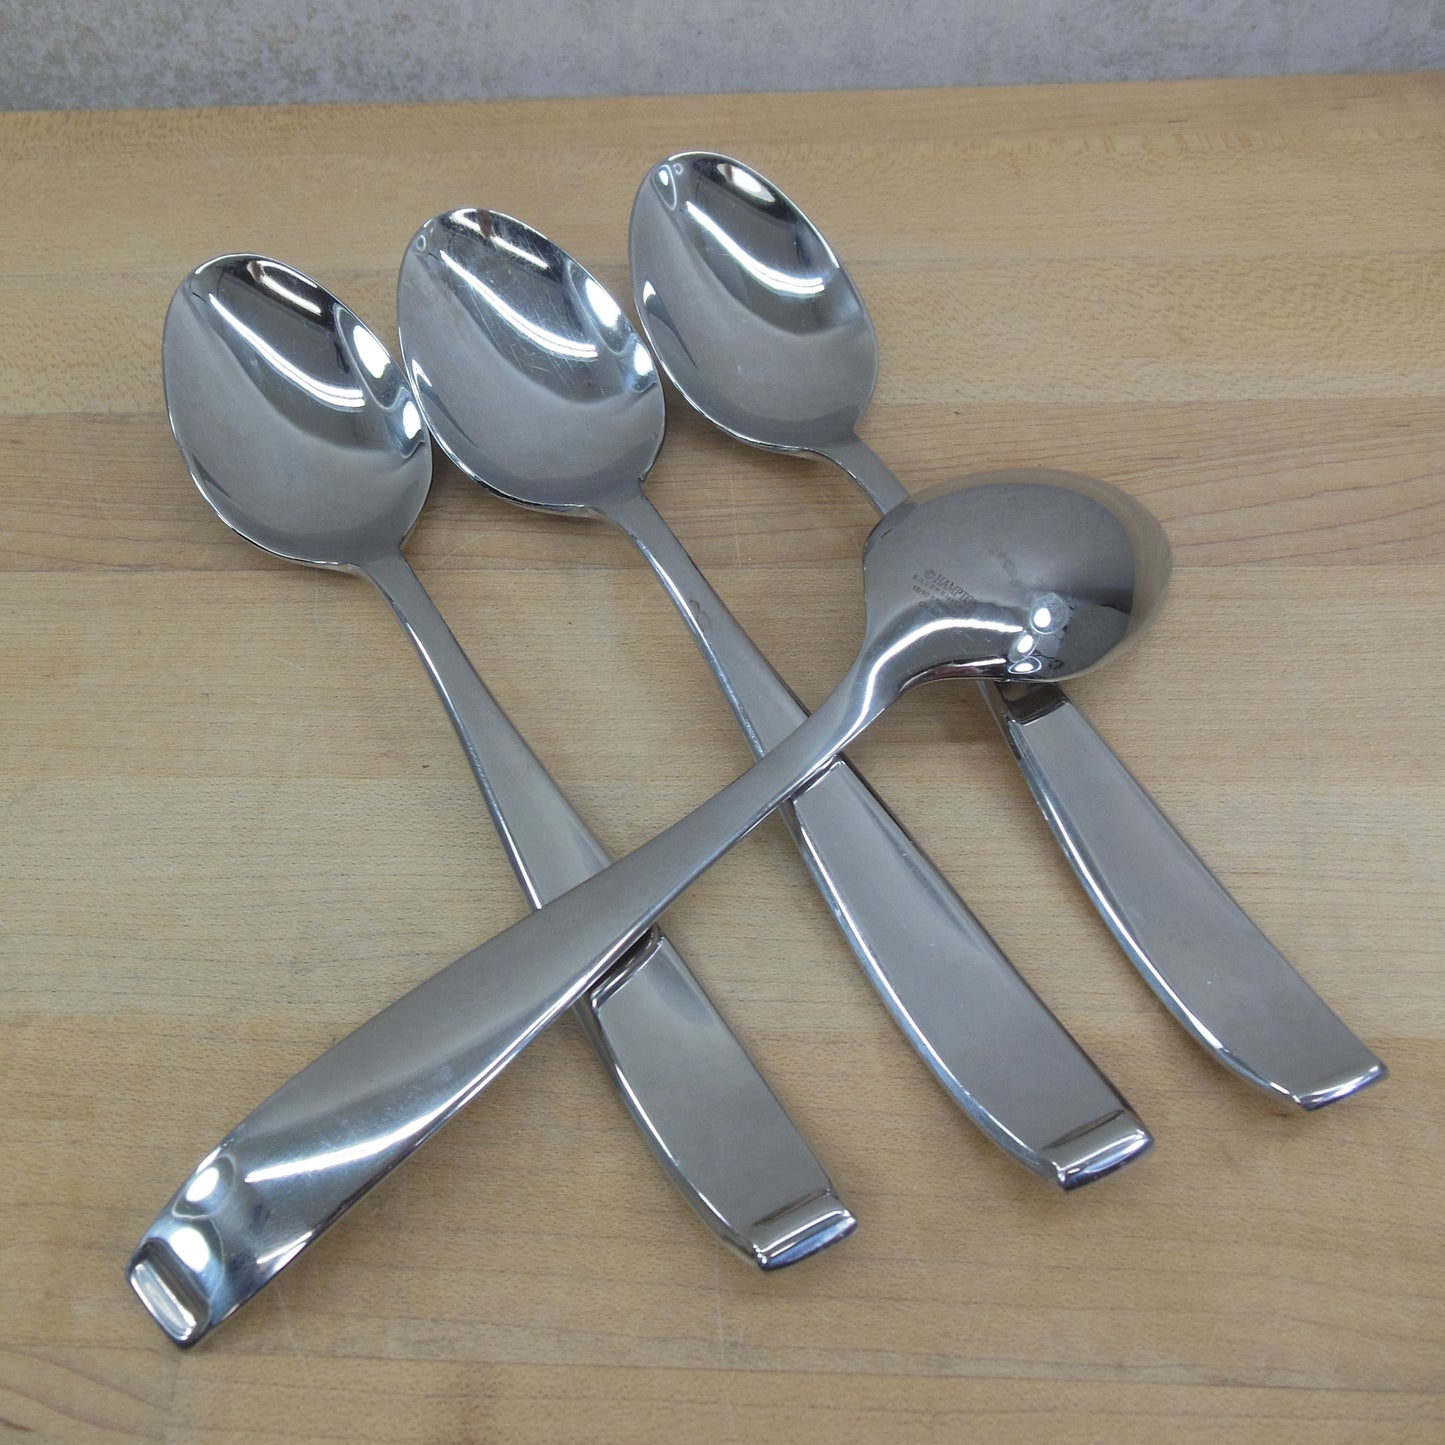 Hampton Silversmiths Stainless Bergen Flatware - Soup/Place Spoons 4 Set used